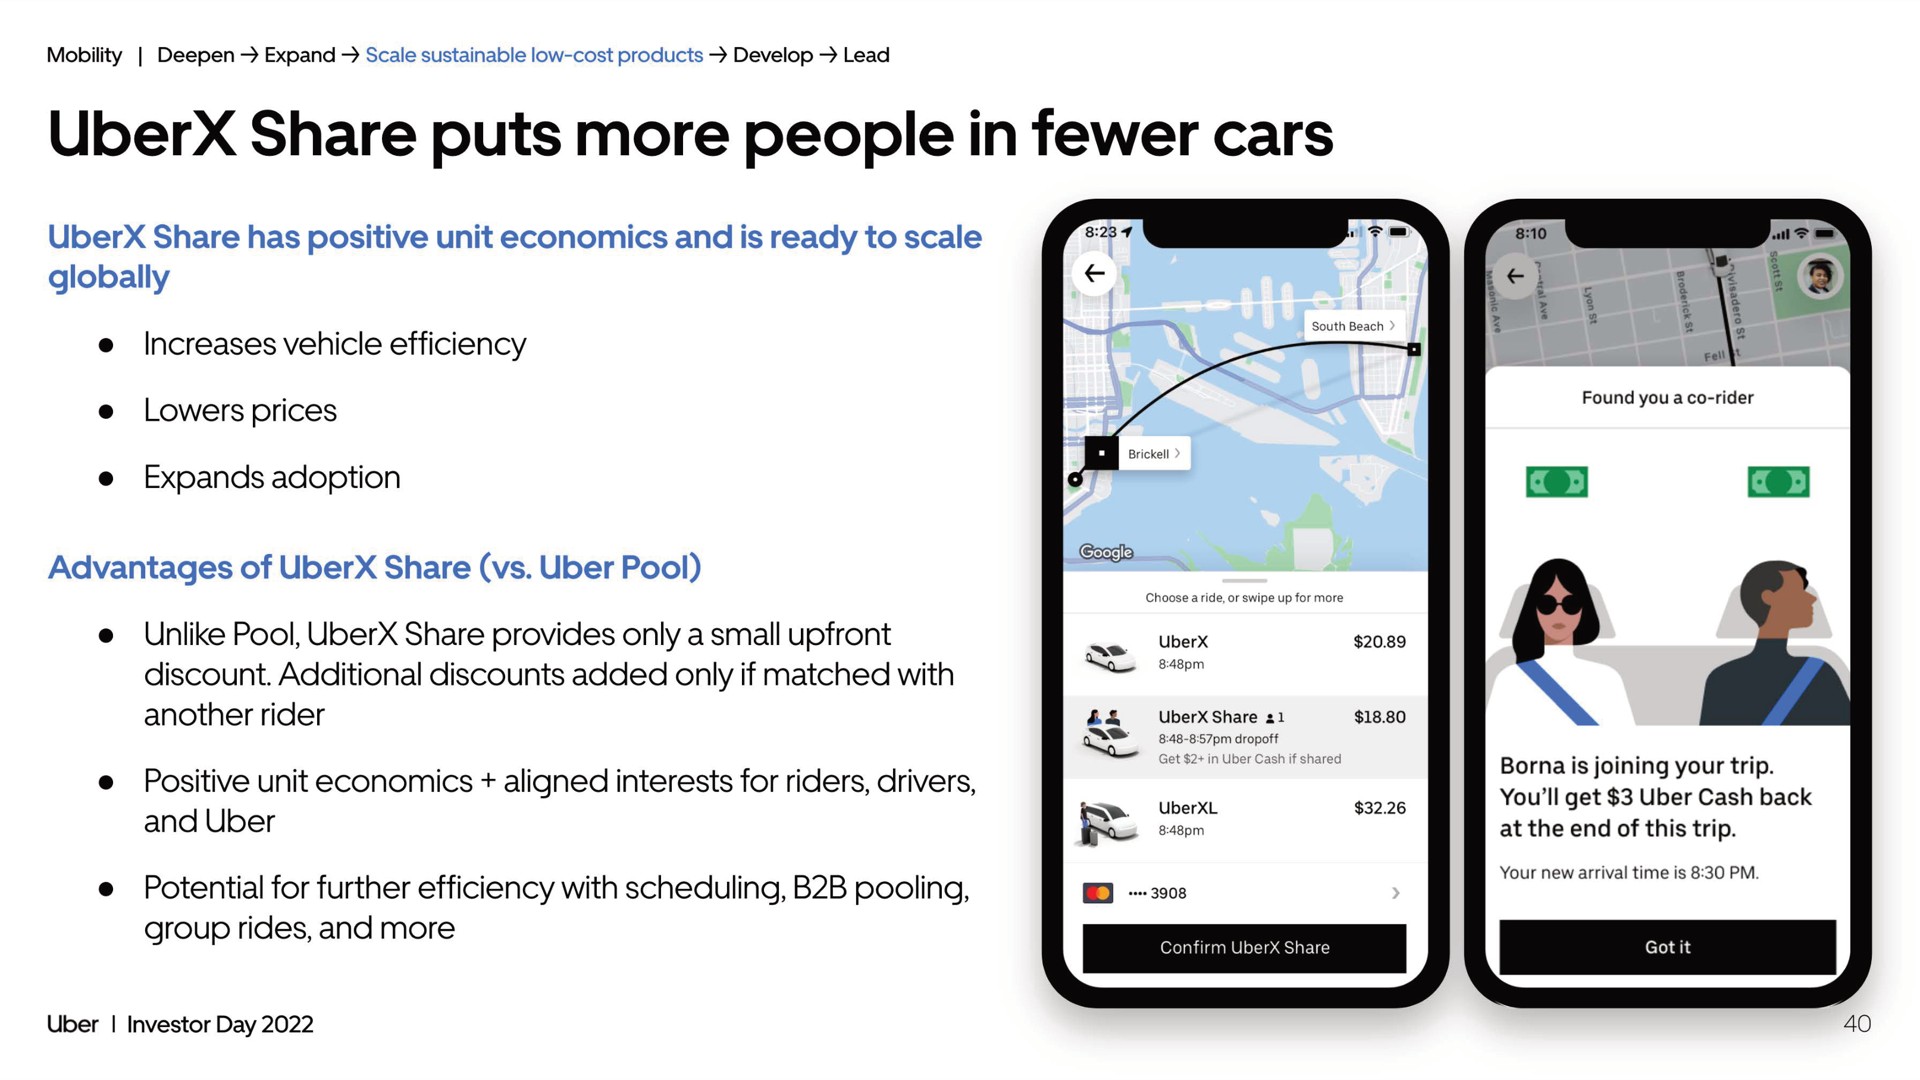 share puts more people in cars | Uber